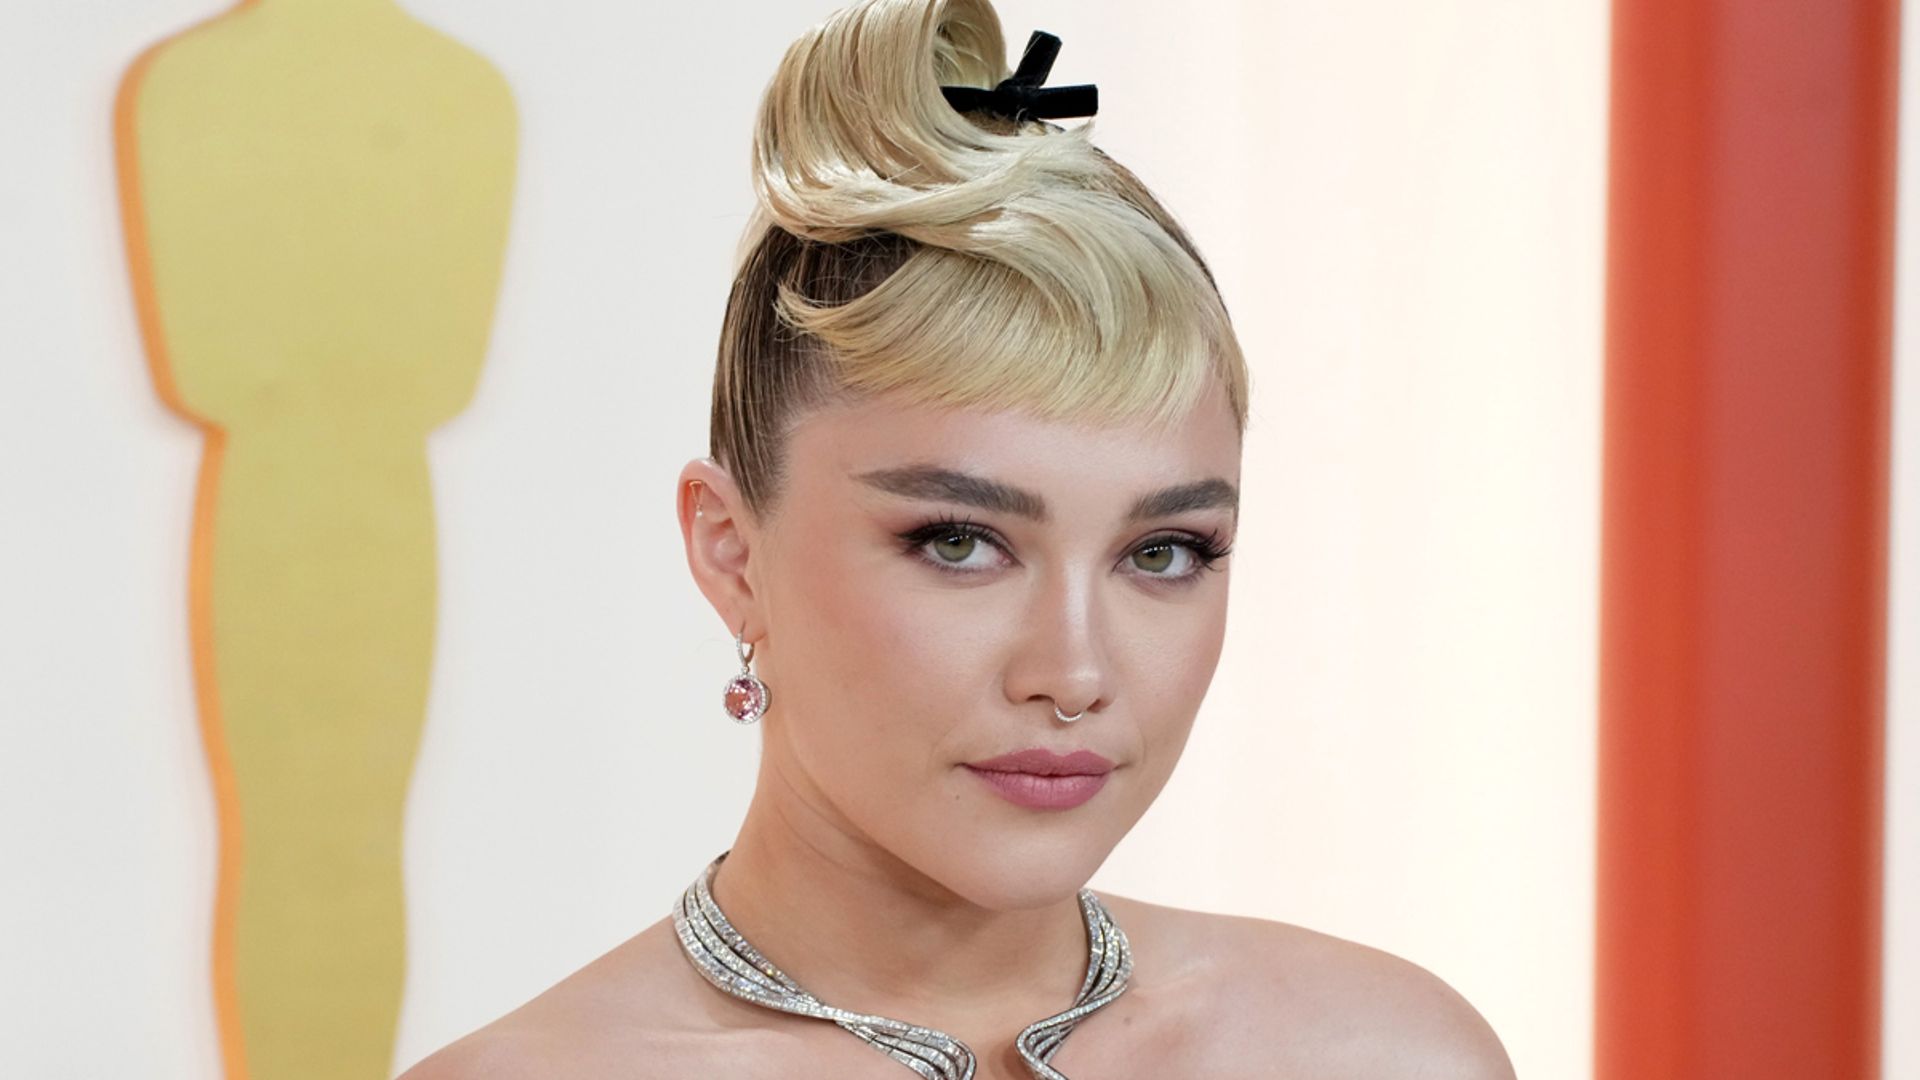 Florence Pugh Surprises In Leg Baring Oscars Dress And Hot Pants We Never Expected. HELLO!